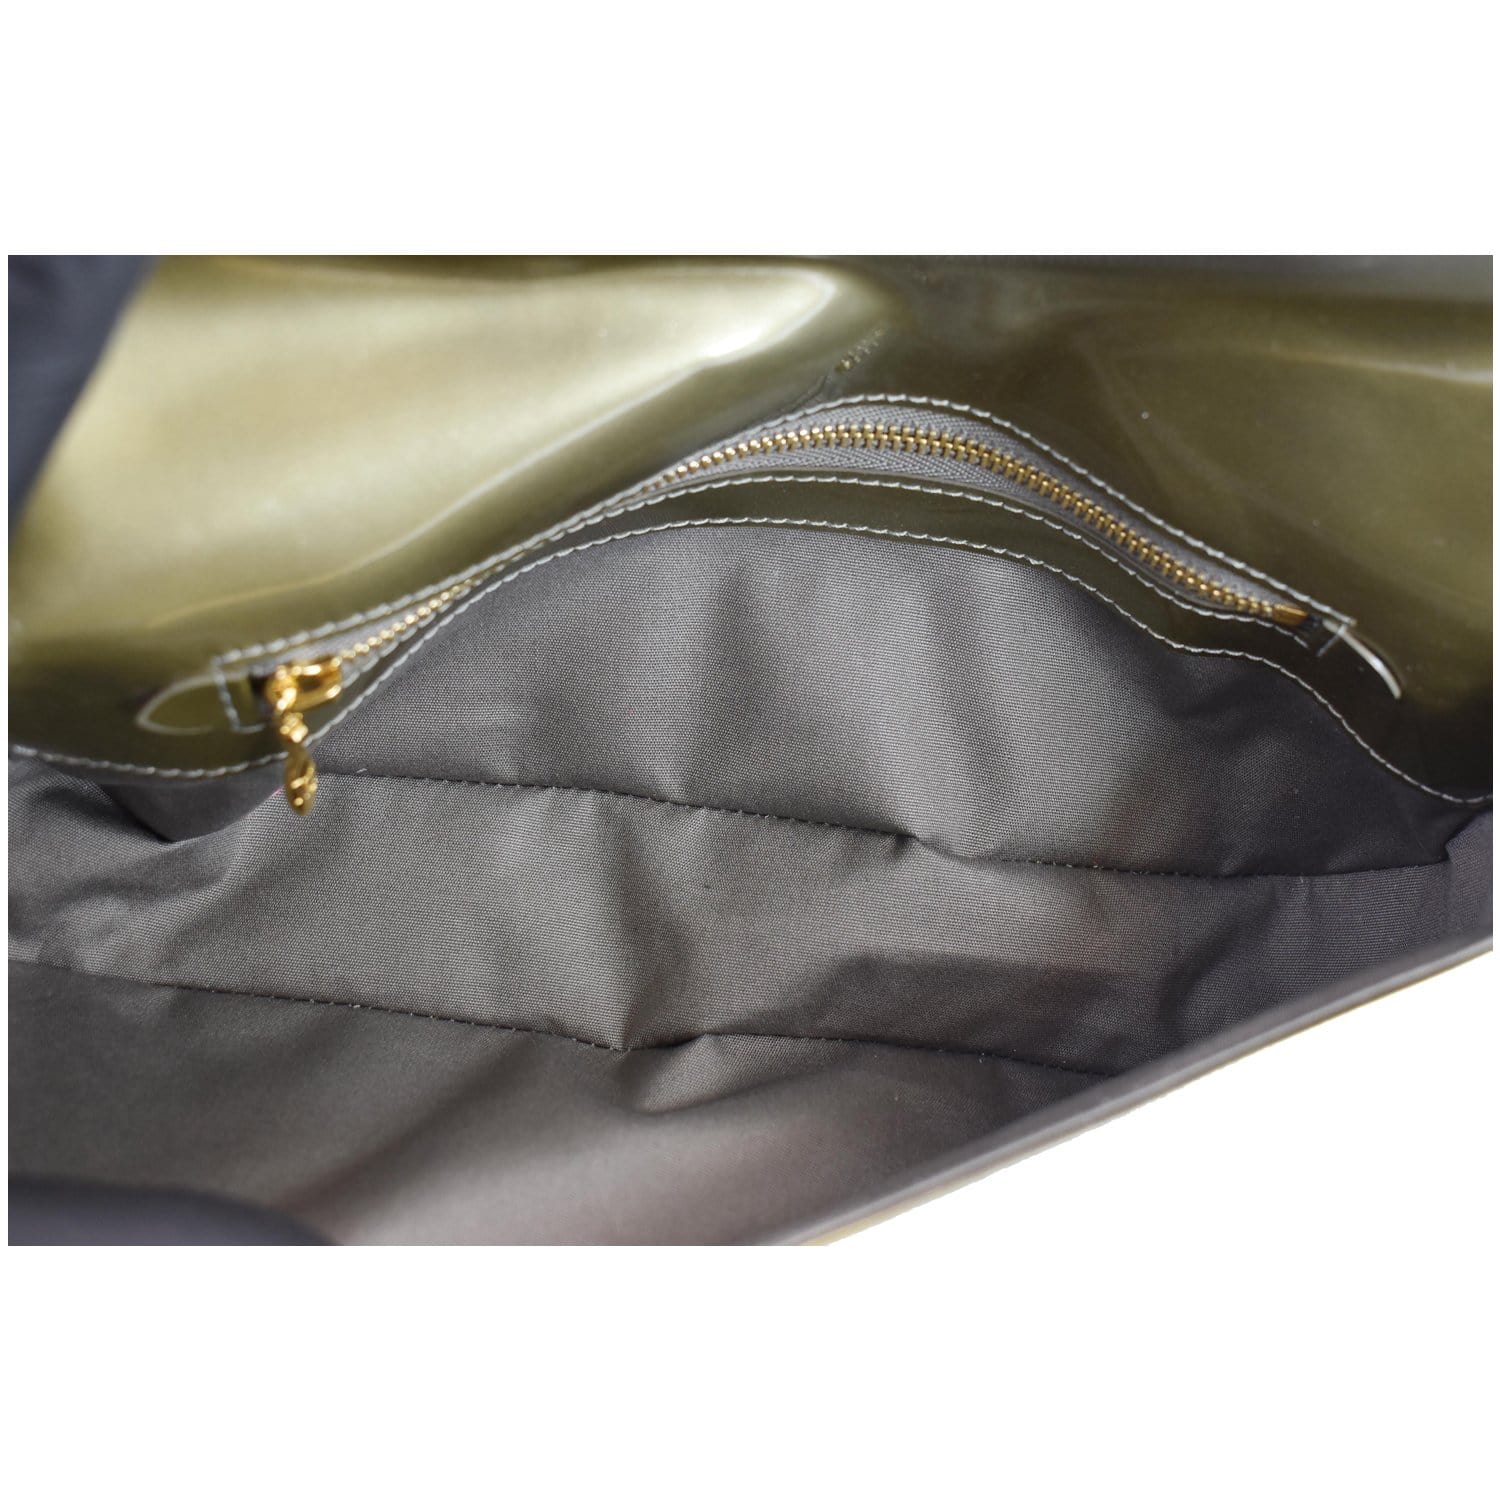 Louis Vuitton - Authenticated Sobe Clutch Bag - Leather Beige Plain for Women, Very Good Condition